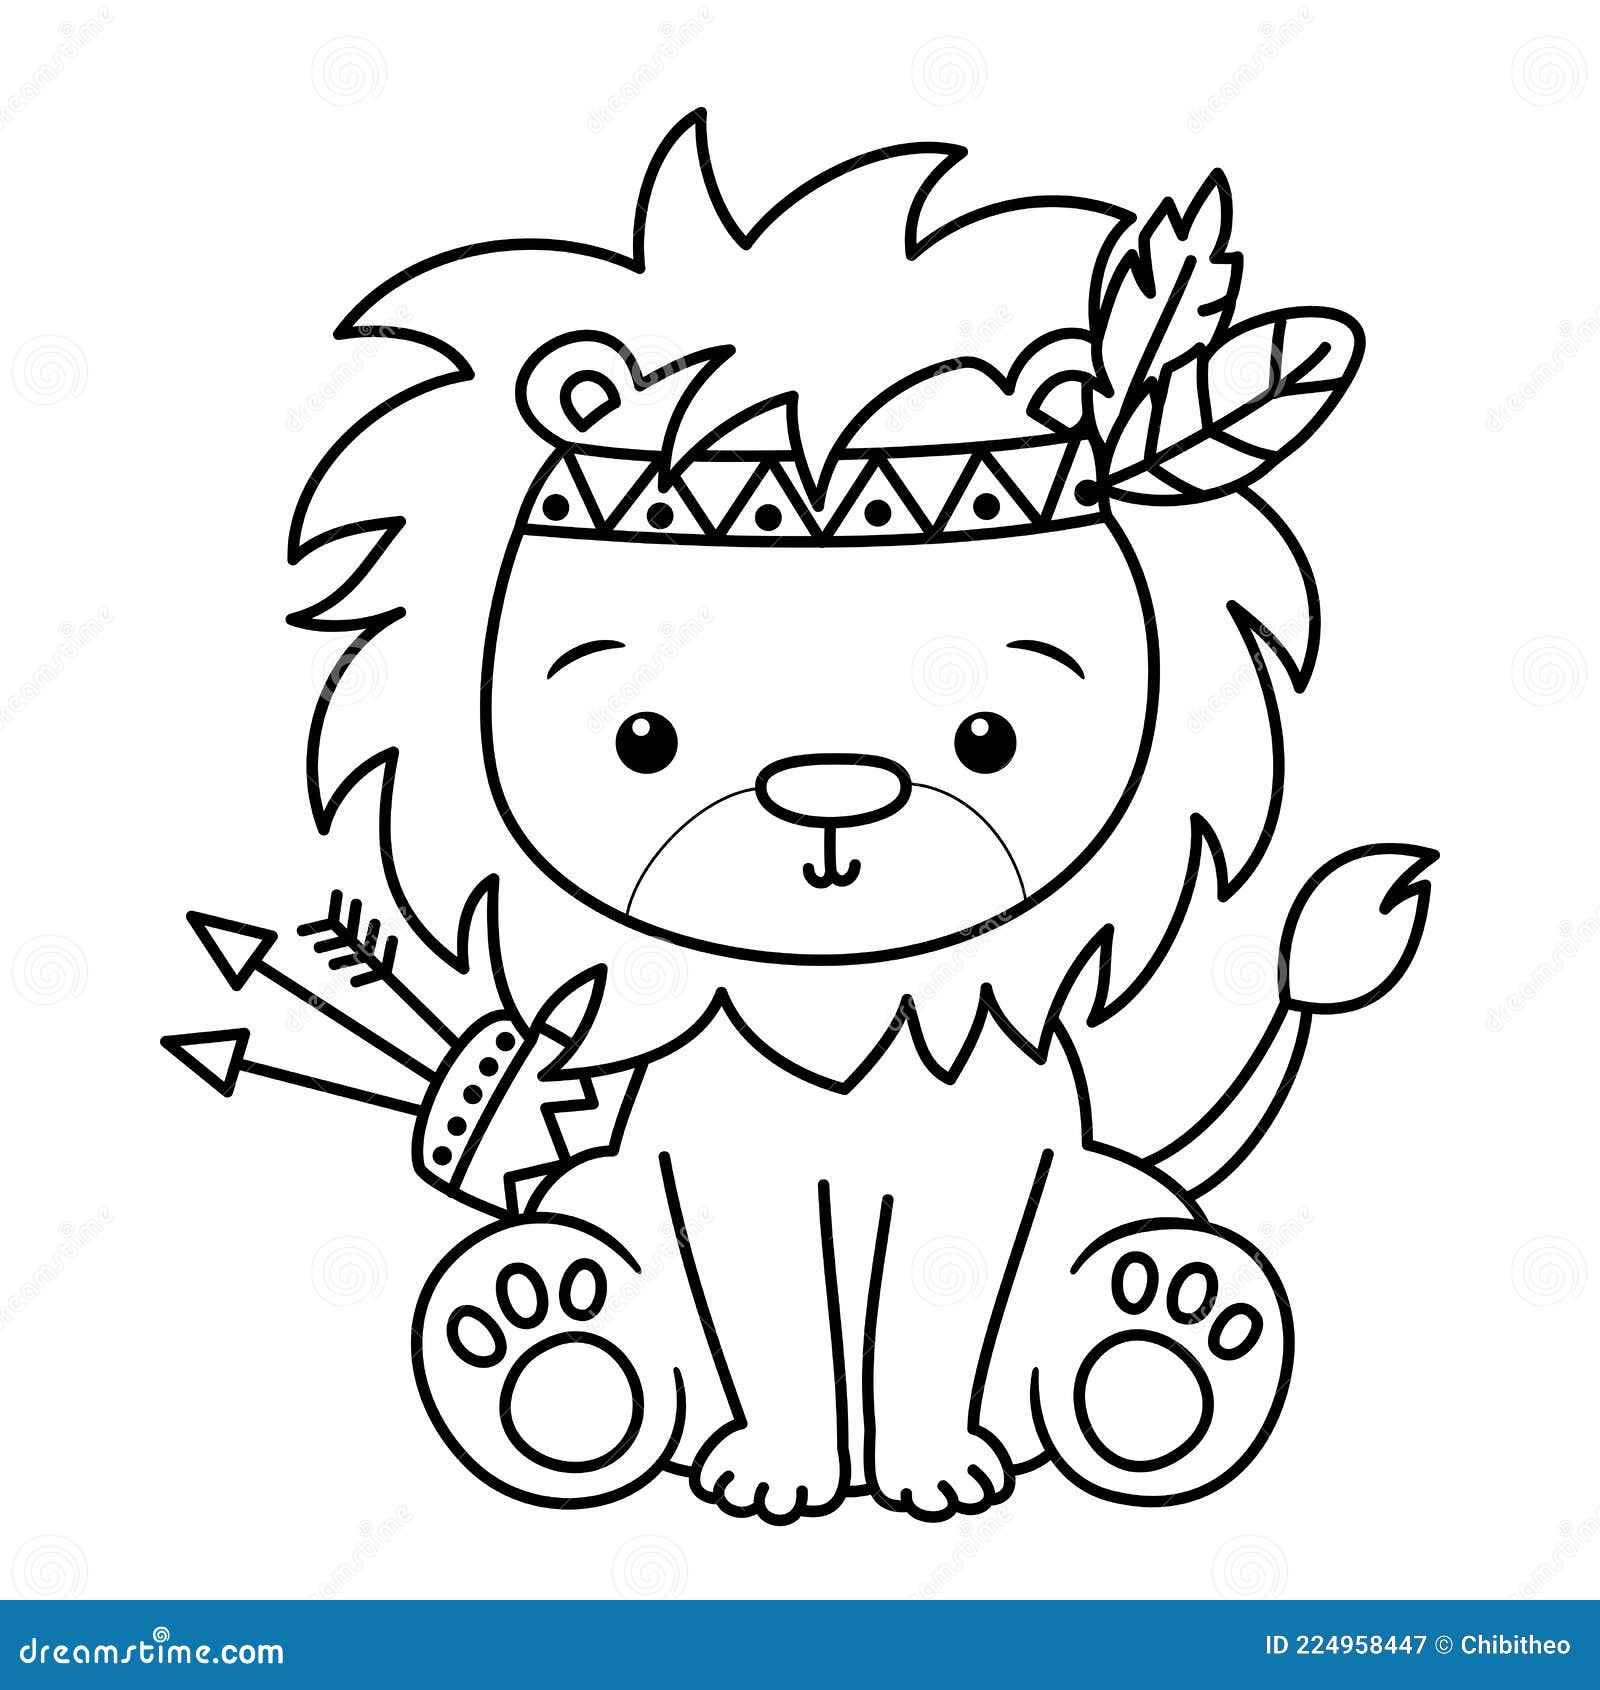 A Cute Lion Sitting with an Arrow, for Coloring Pictures Stock ...